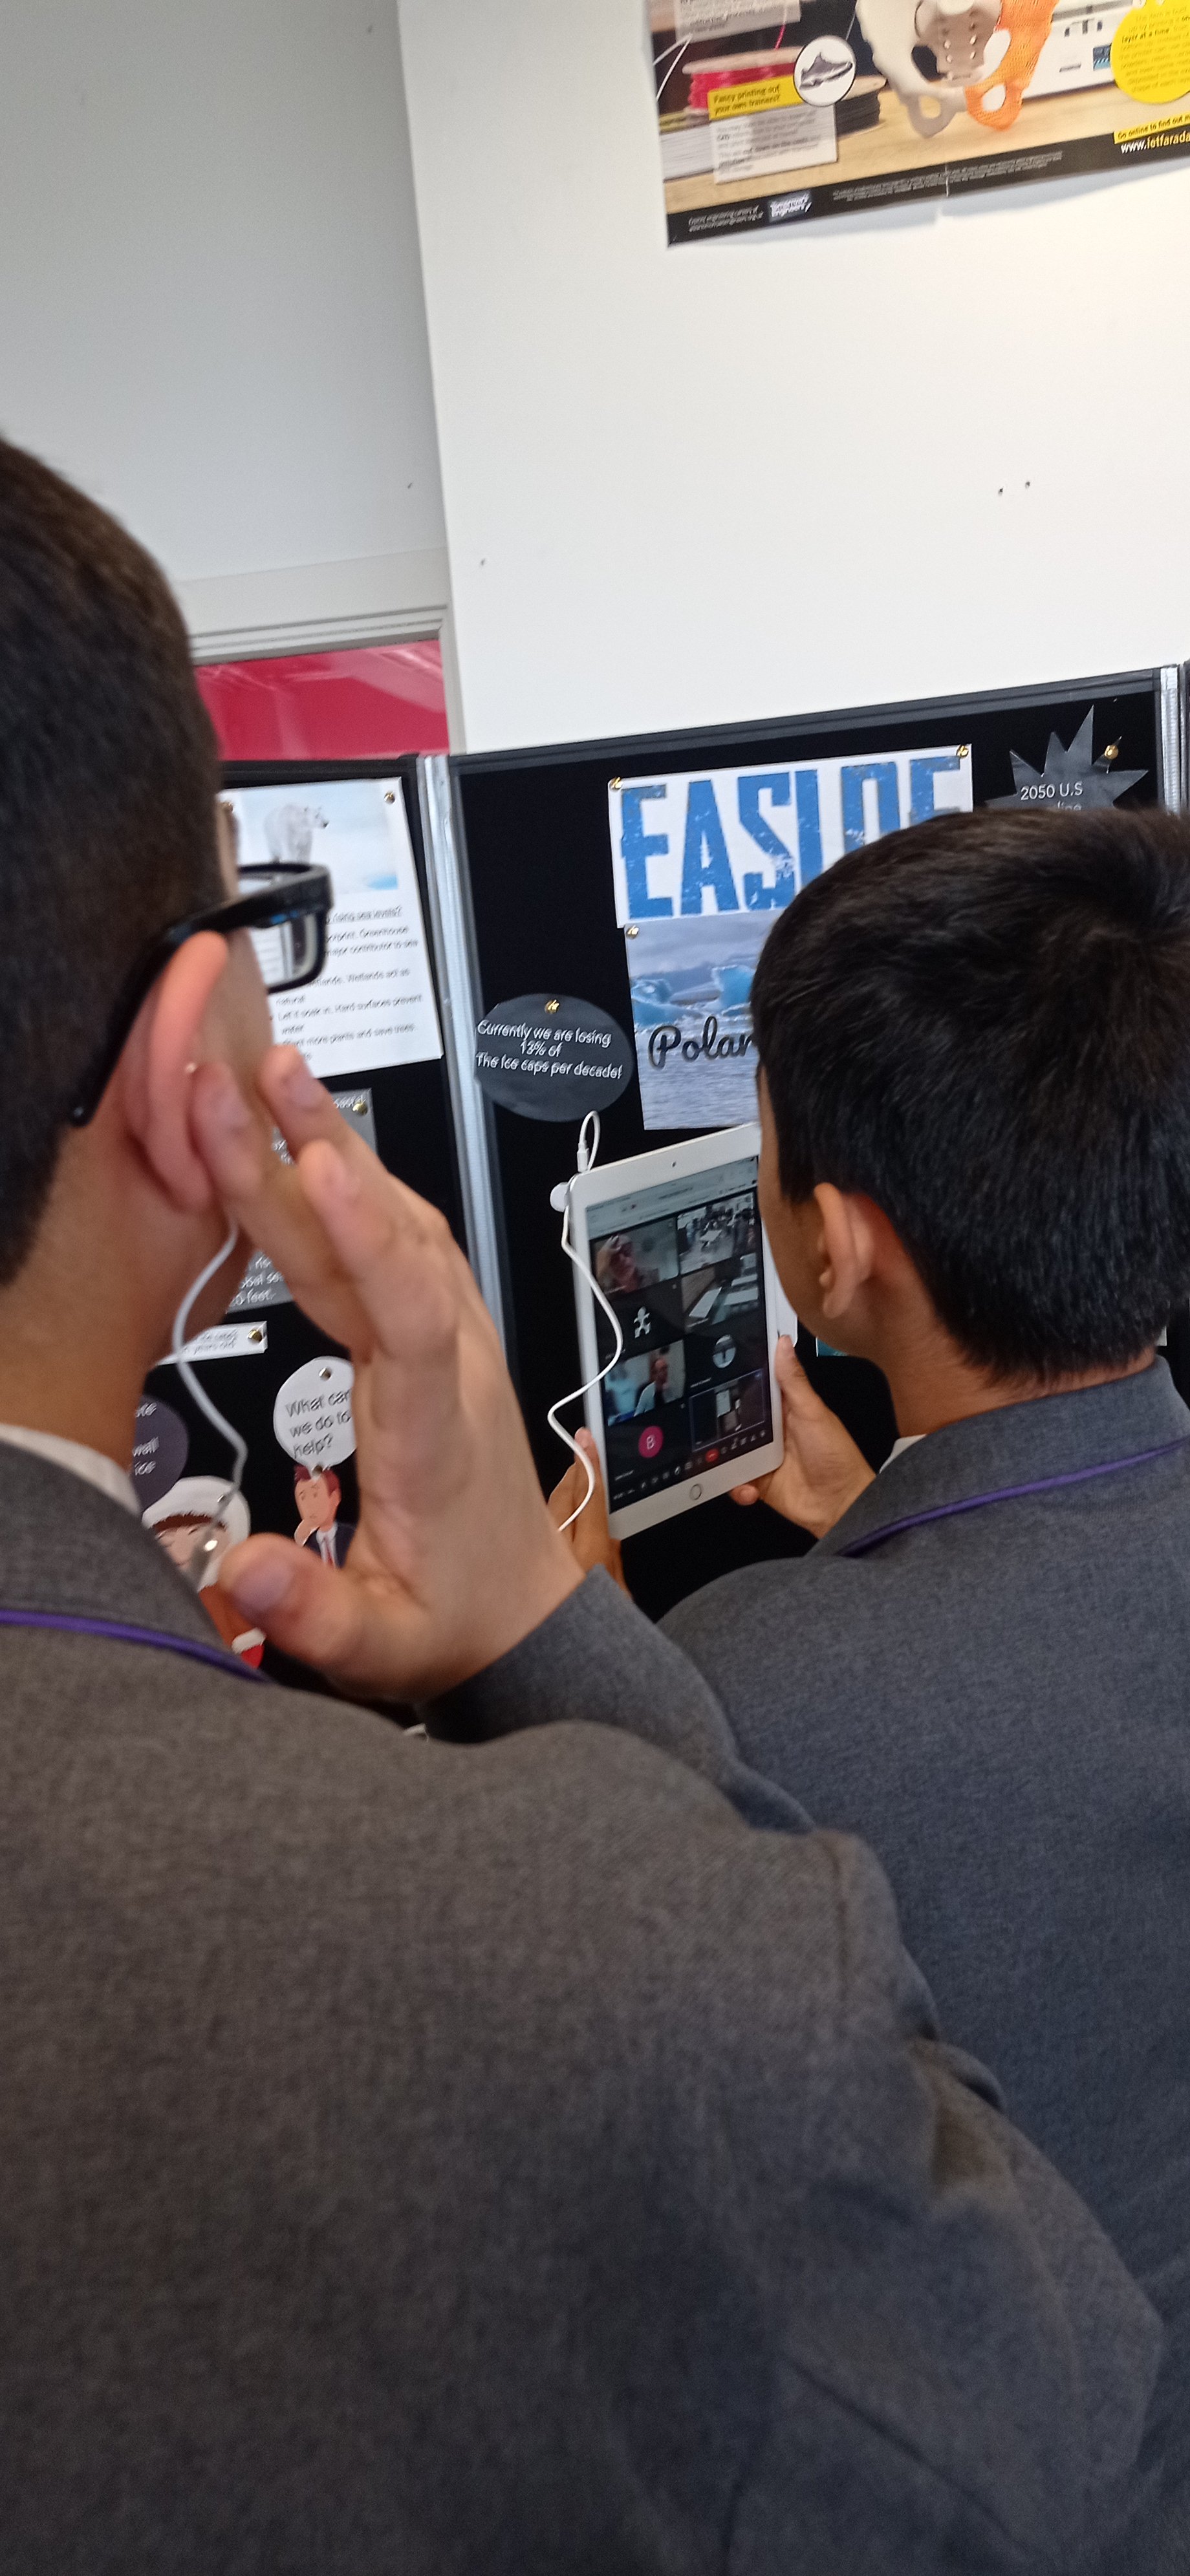 Students giving virtual tour of their EASLOE exhibition.jpg